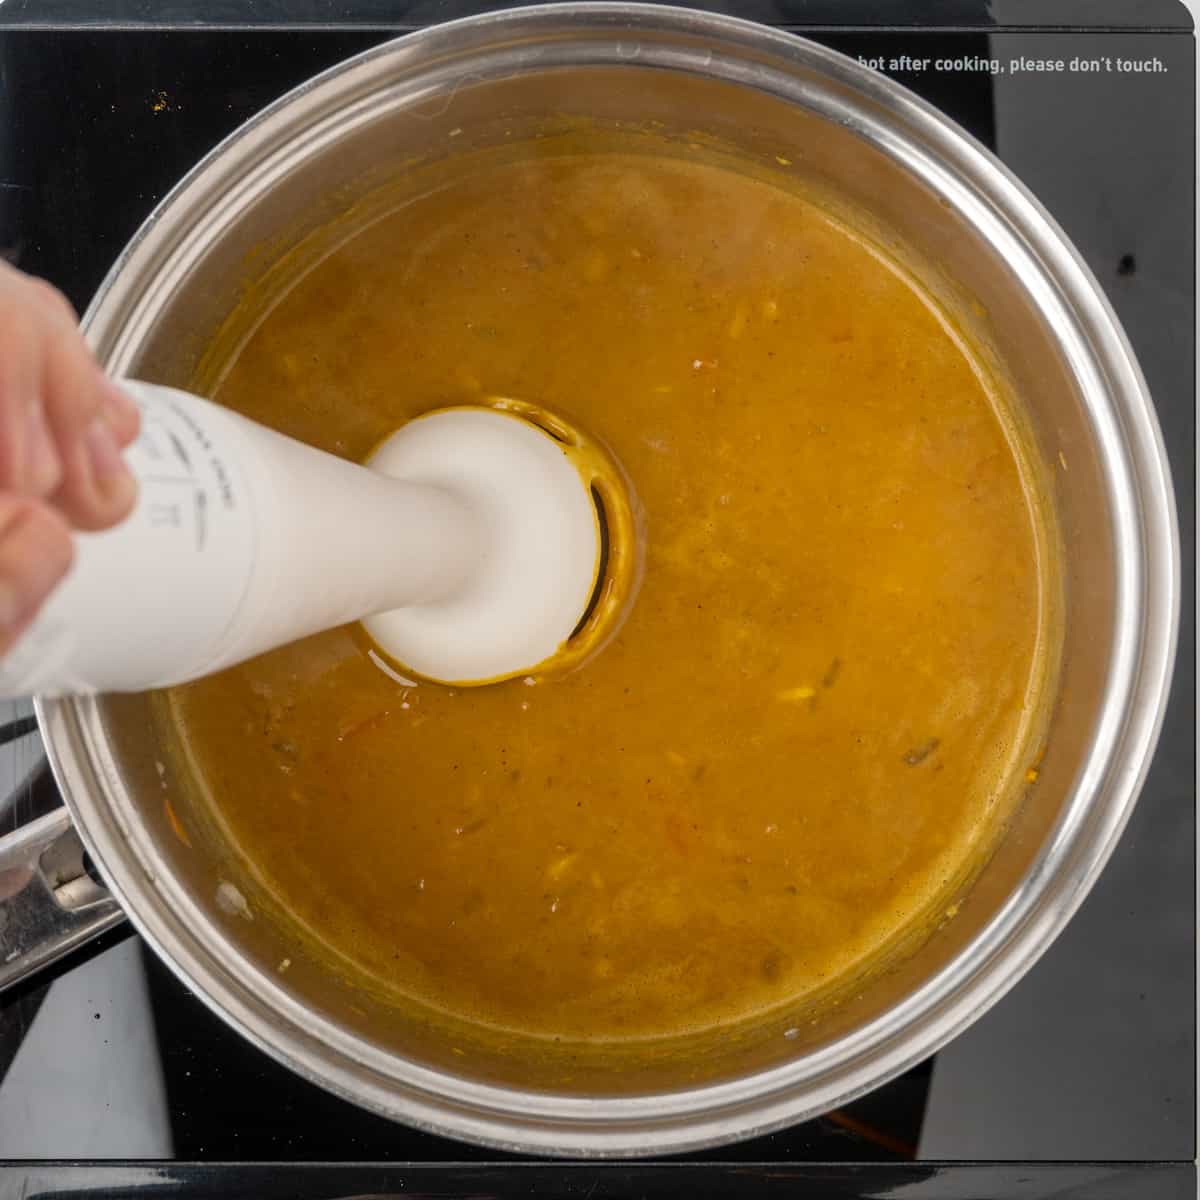 Blending the curry sauce with an immersion blender.